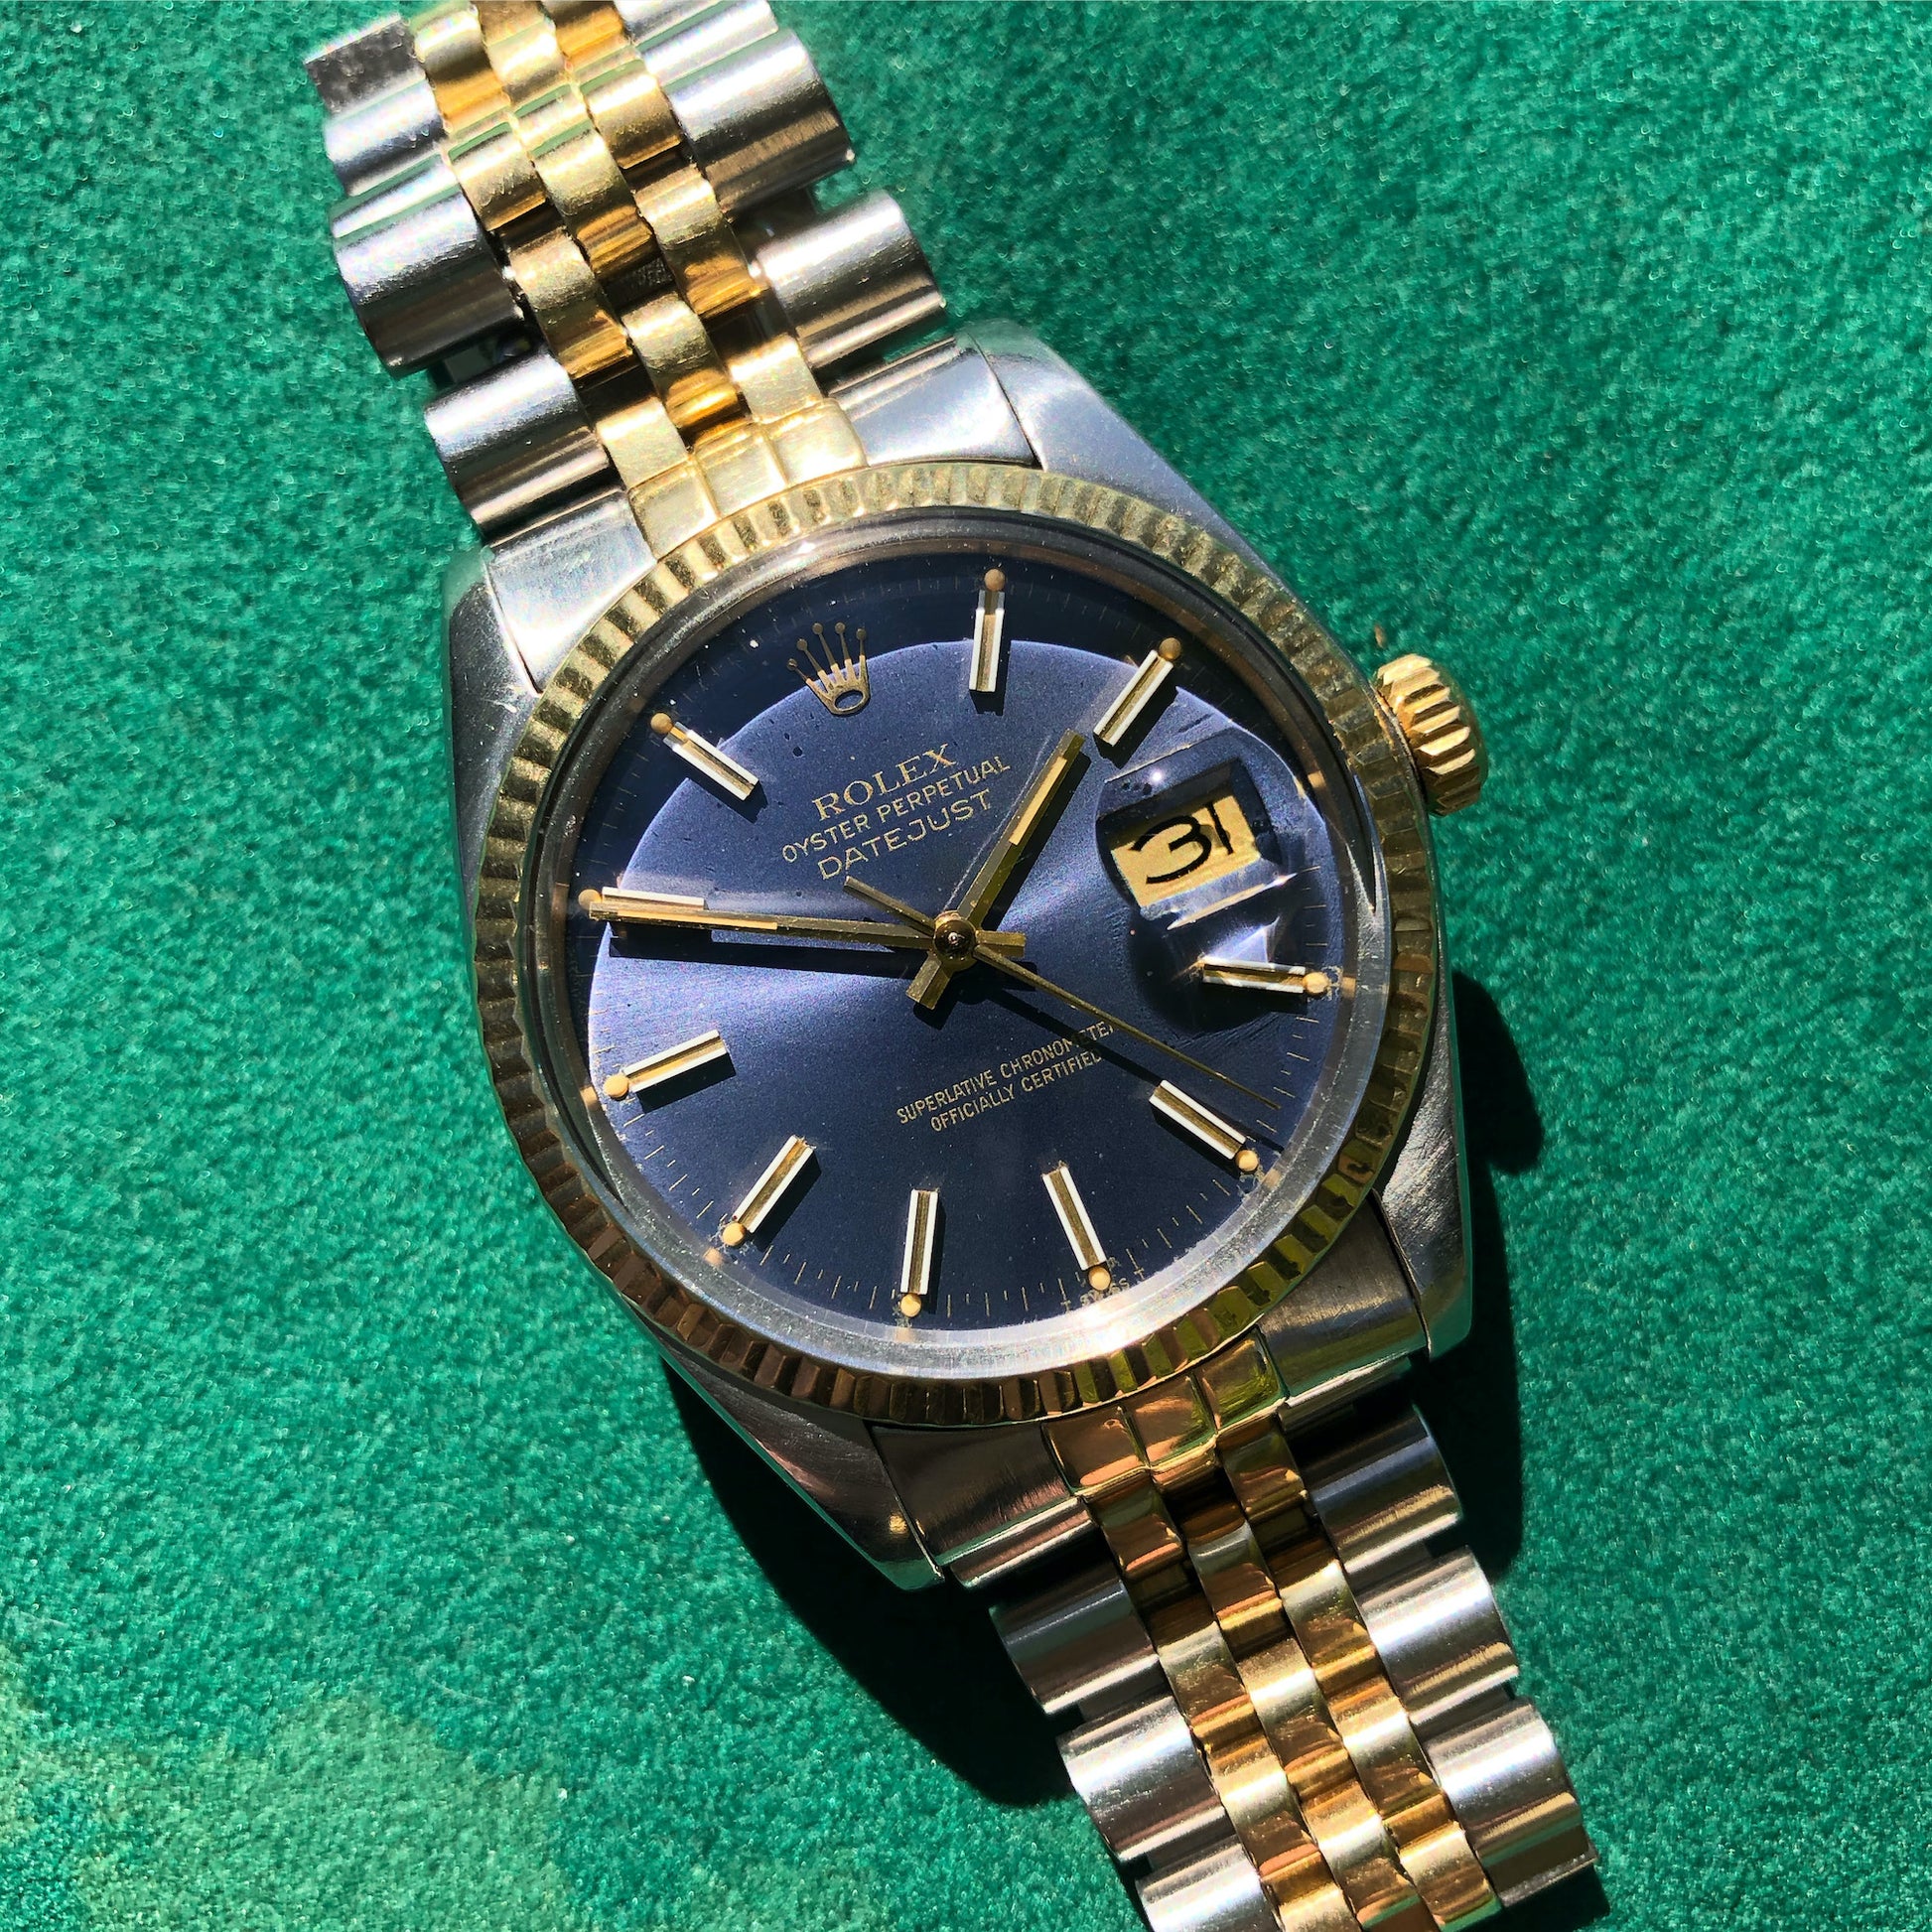 Vintage Rolex Datejust 16013 Steel Gold Two Tone Jubilee Tropical Automatic Wristwatch Circa 1980 - Hashtag Watch Company